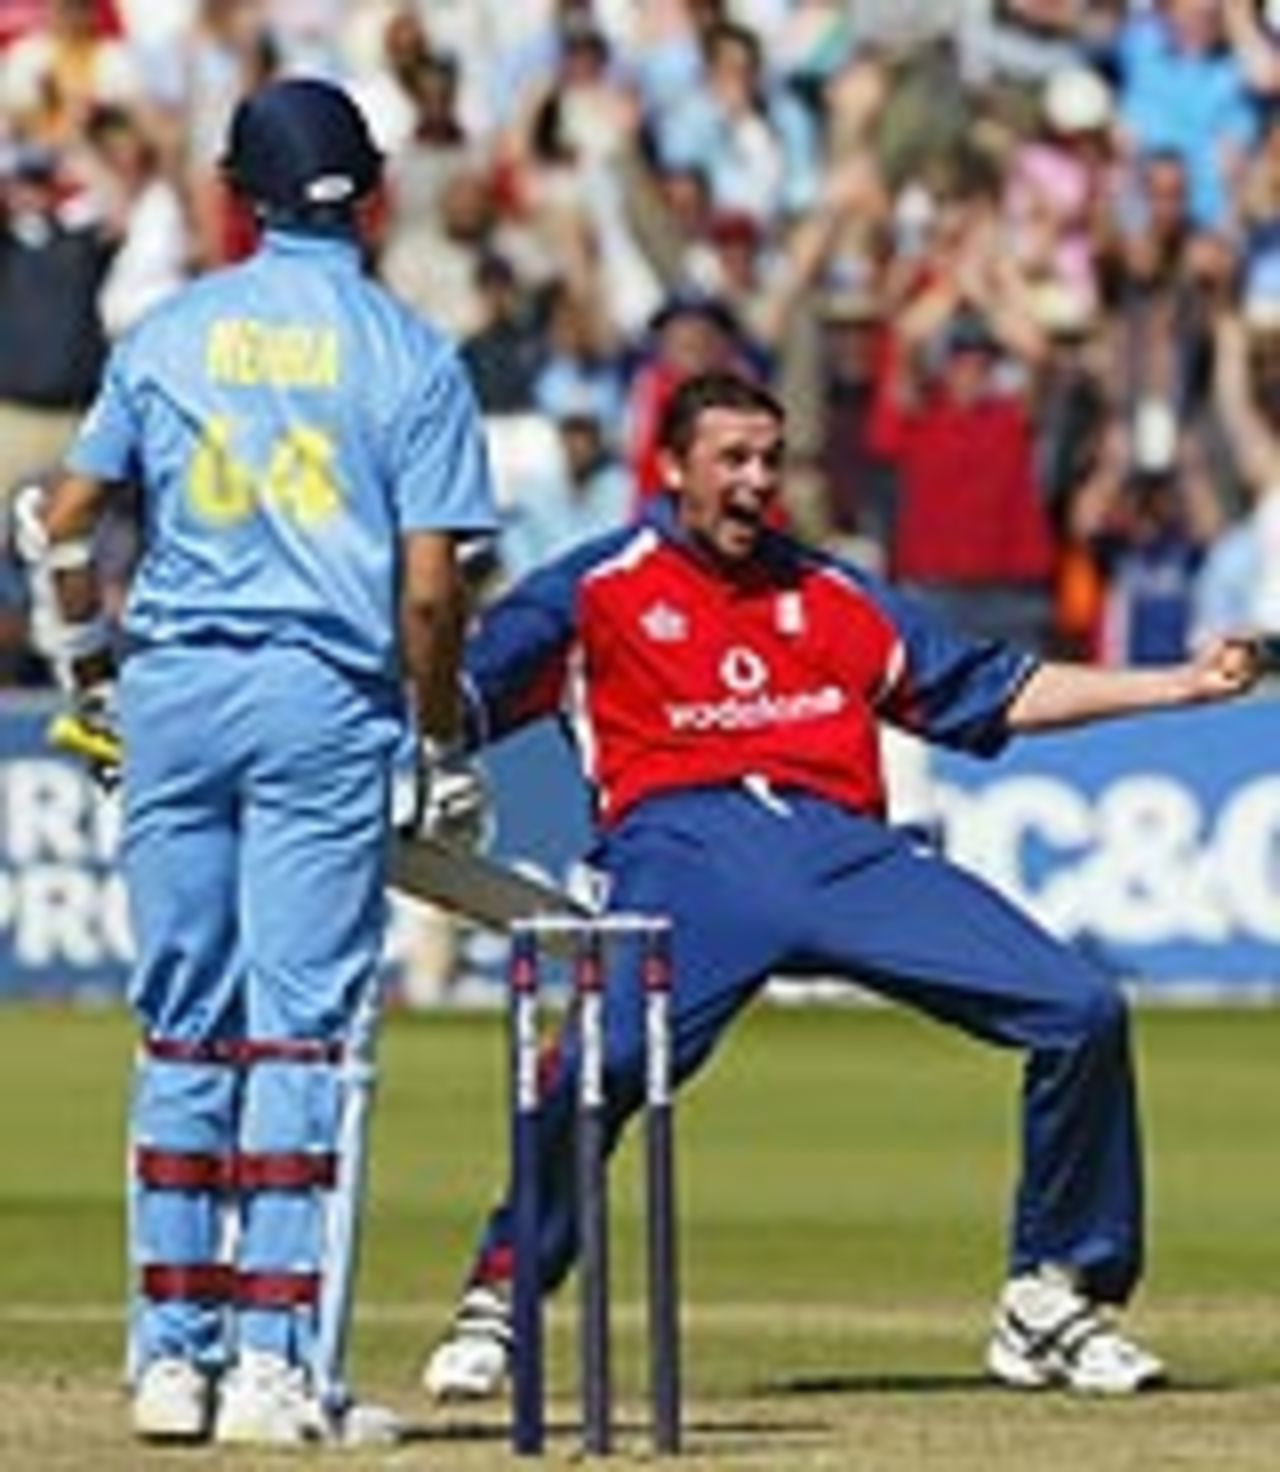 Steve Harmison takes a hat-trick, during the first one-day international at Trent Bridge, England v India, NatWest Challenge, September 1, 2004